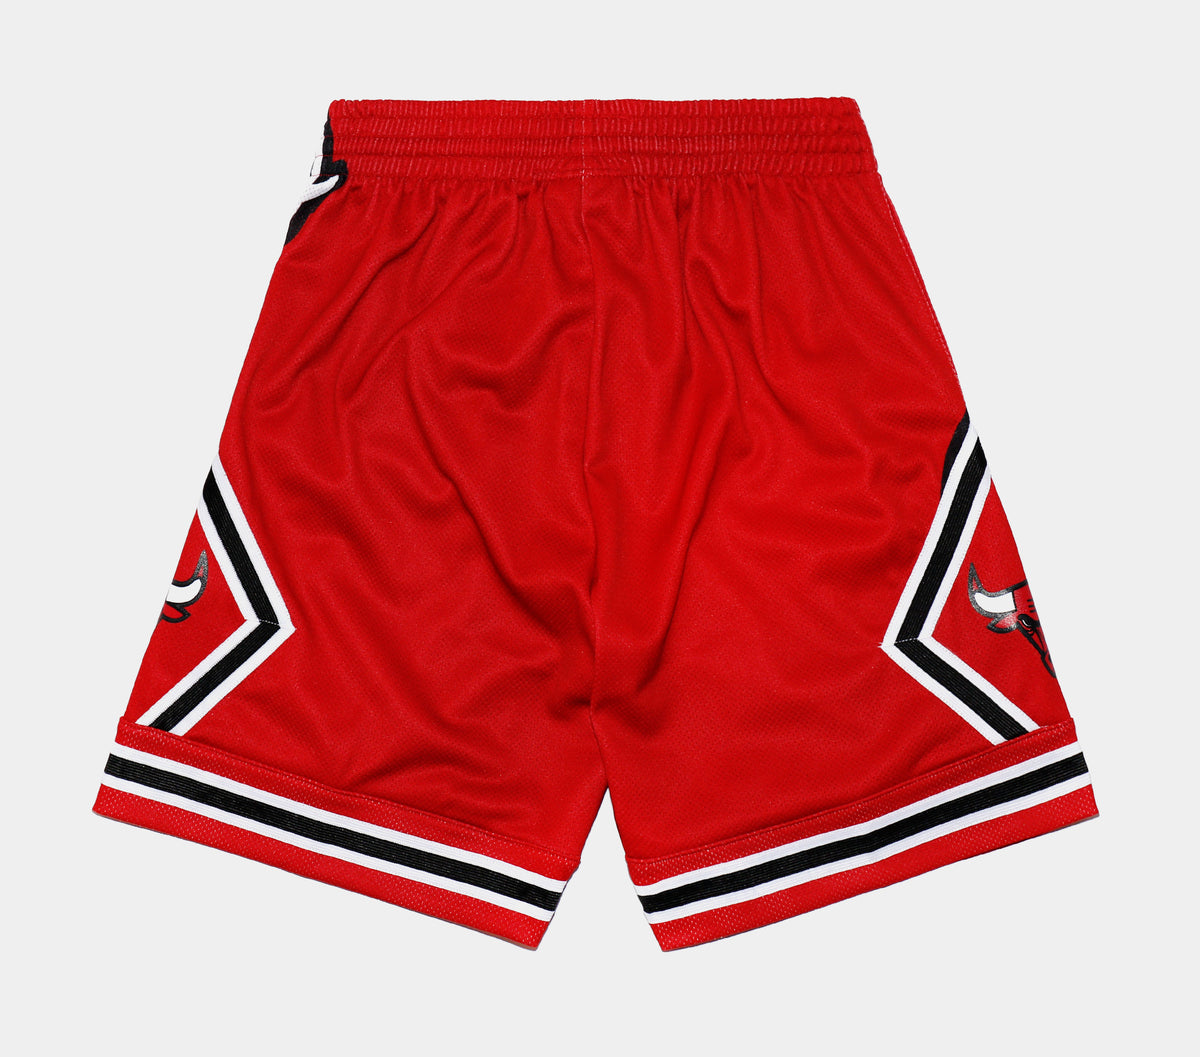 NBA Hometown Champs Shorts - Chicago Bulls by Mitchell & Ness Online, THE  ICONIC